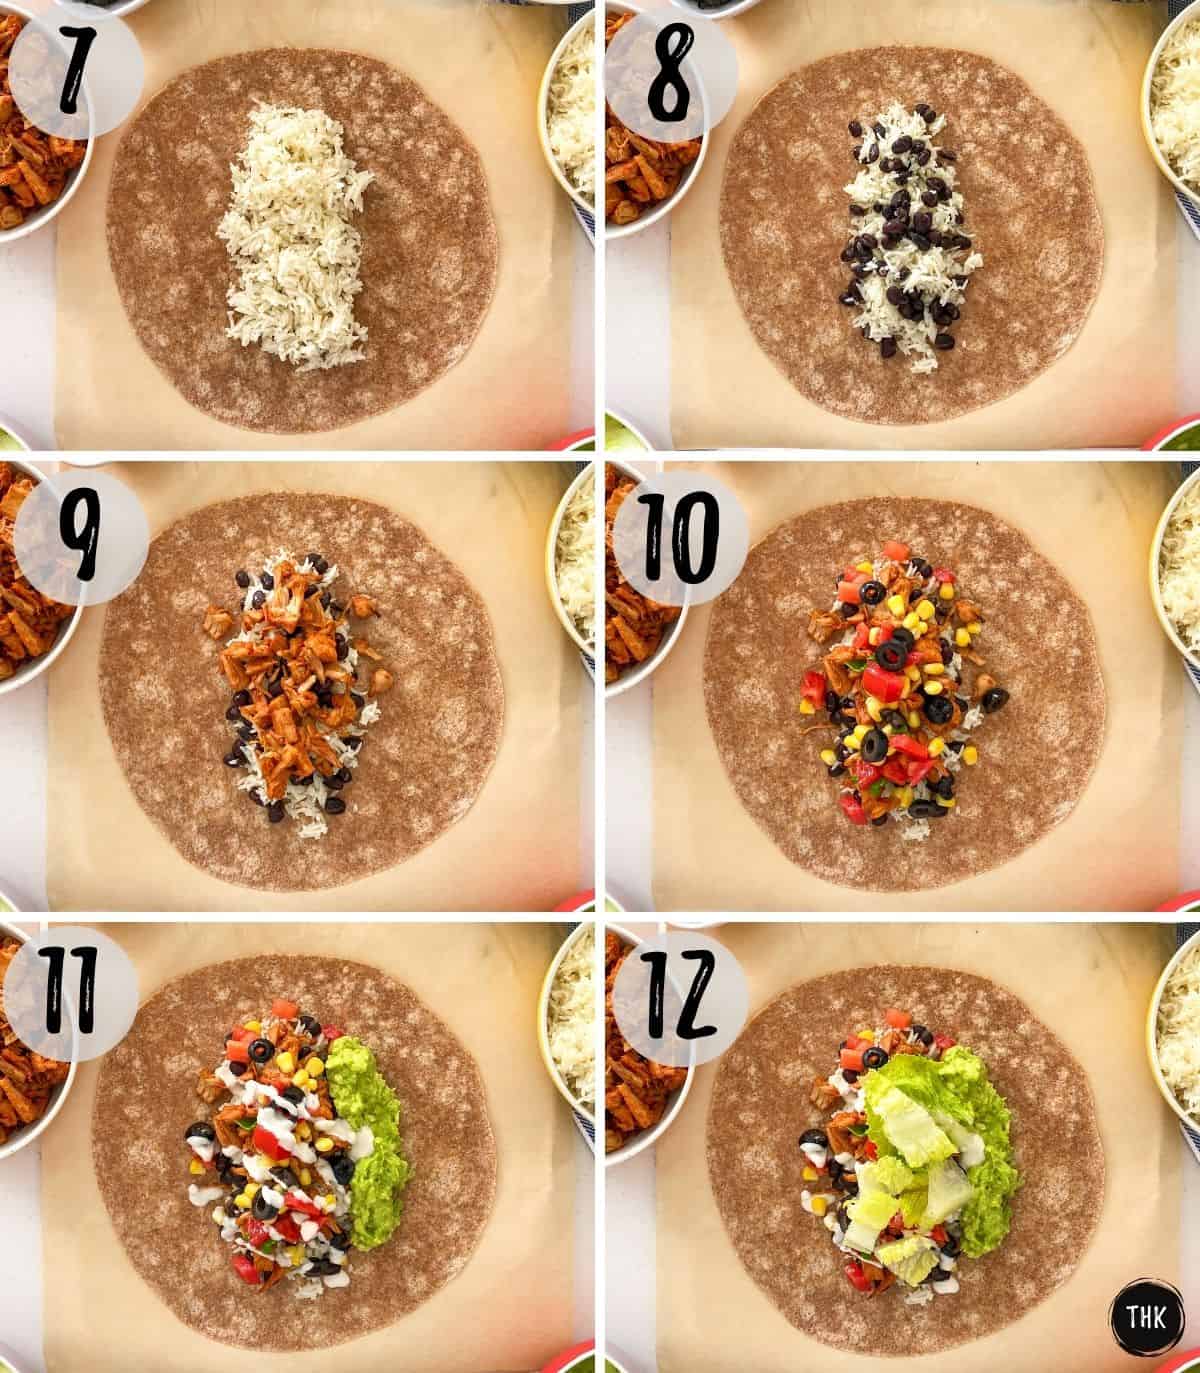 Image collage of vegan burrito being layered with toppings.